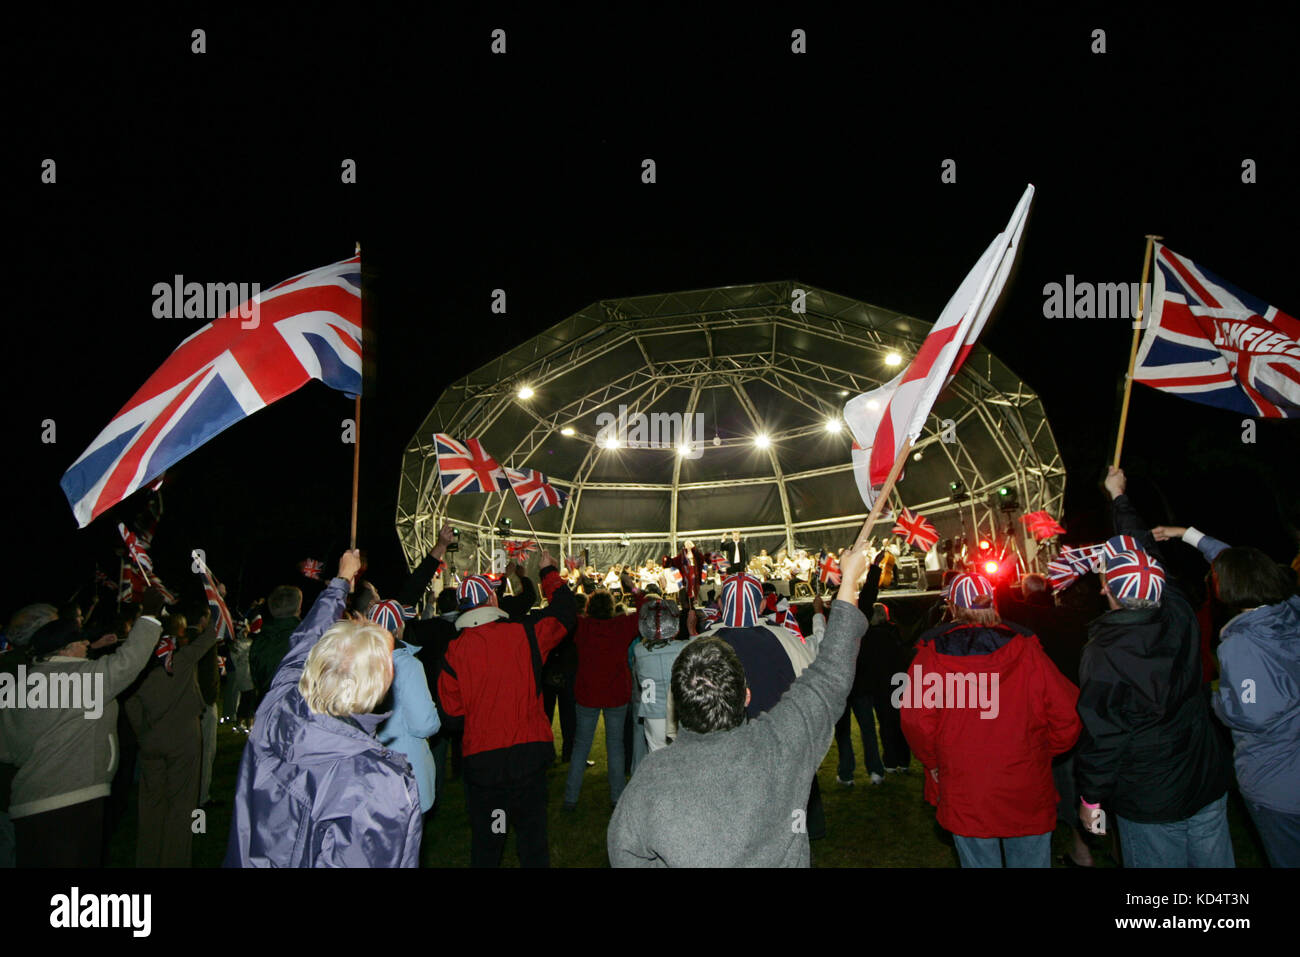 People waving the Union Jack flag at night in front of an illuminated dome stage. Stock Photo